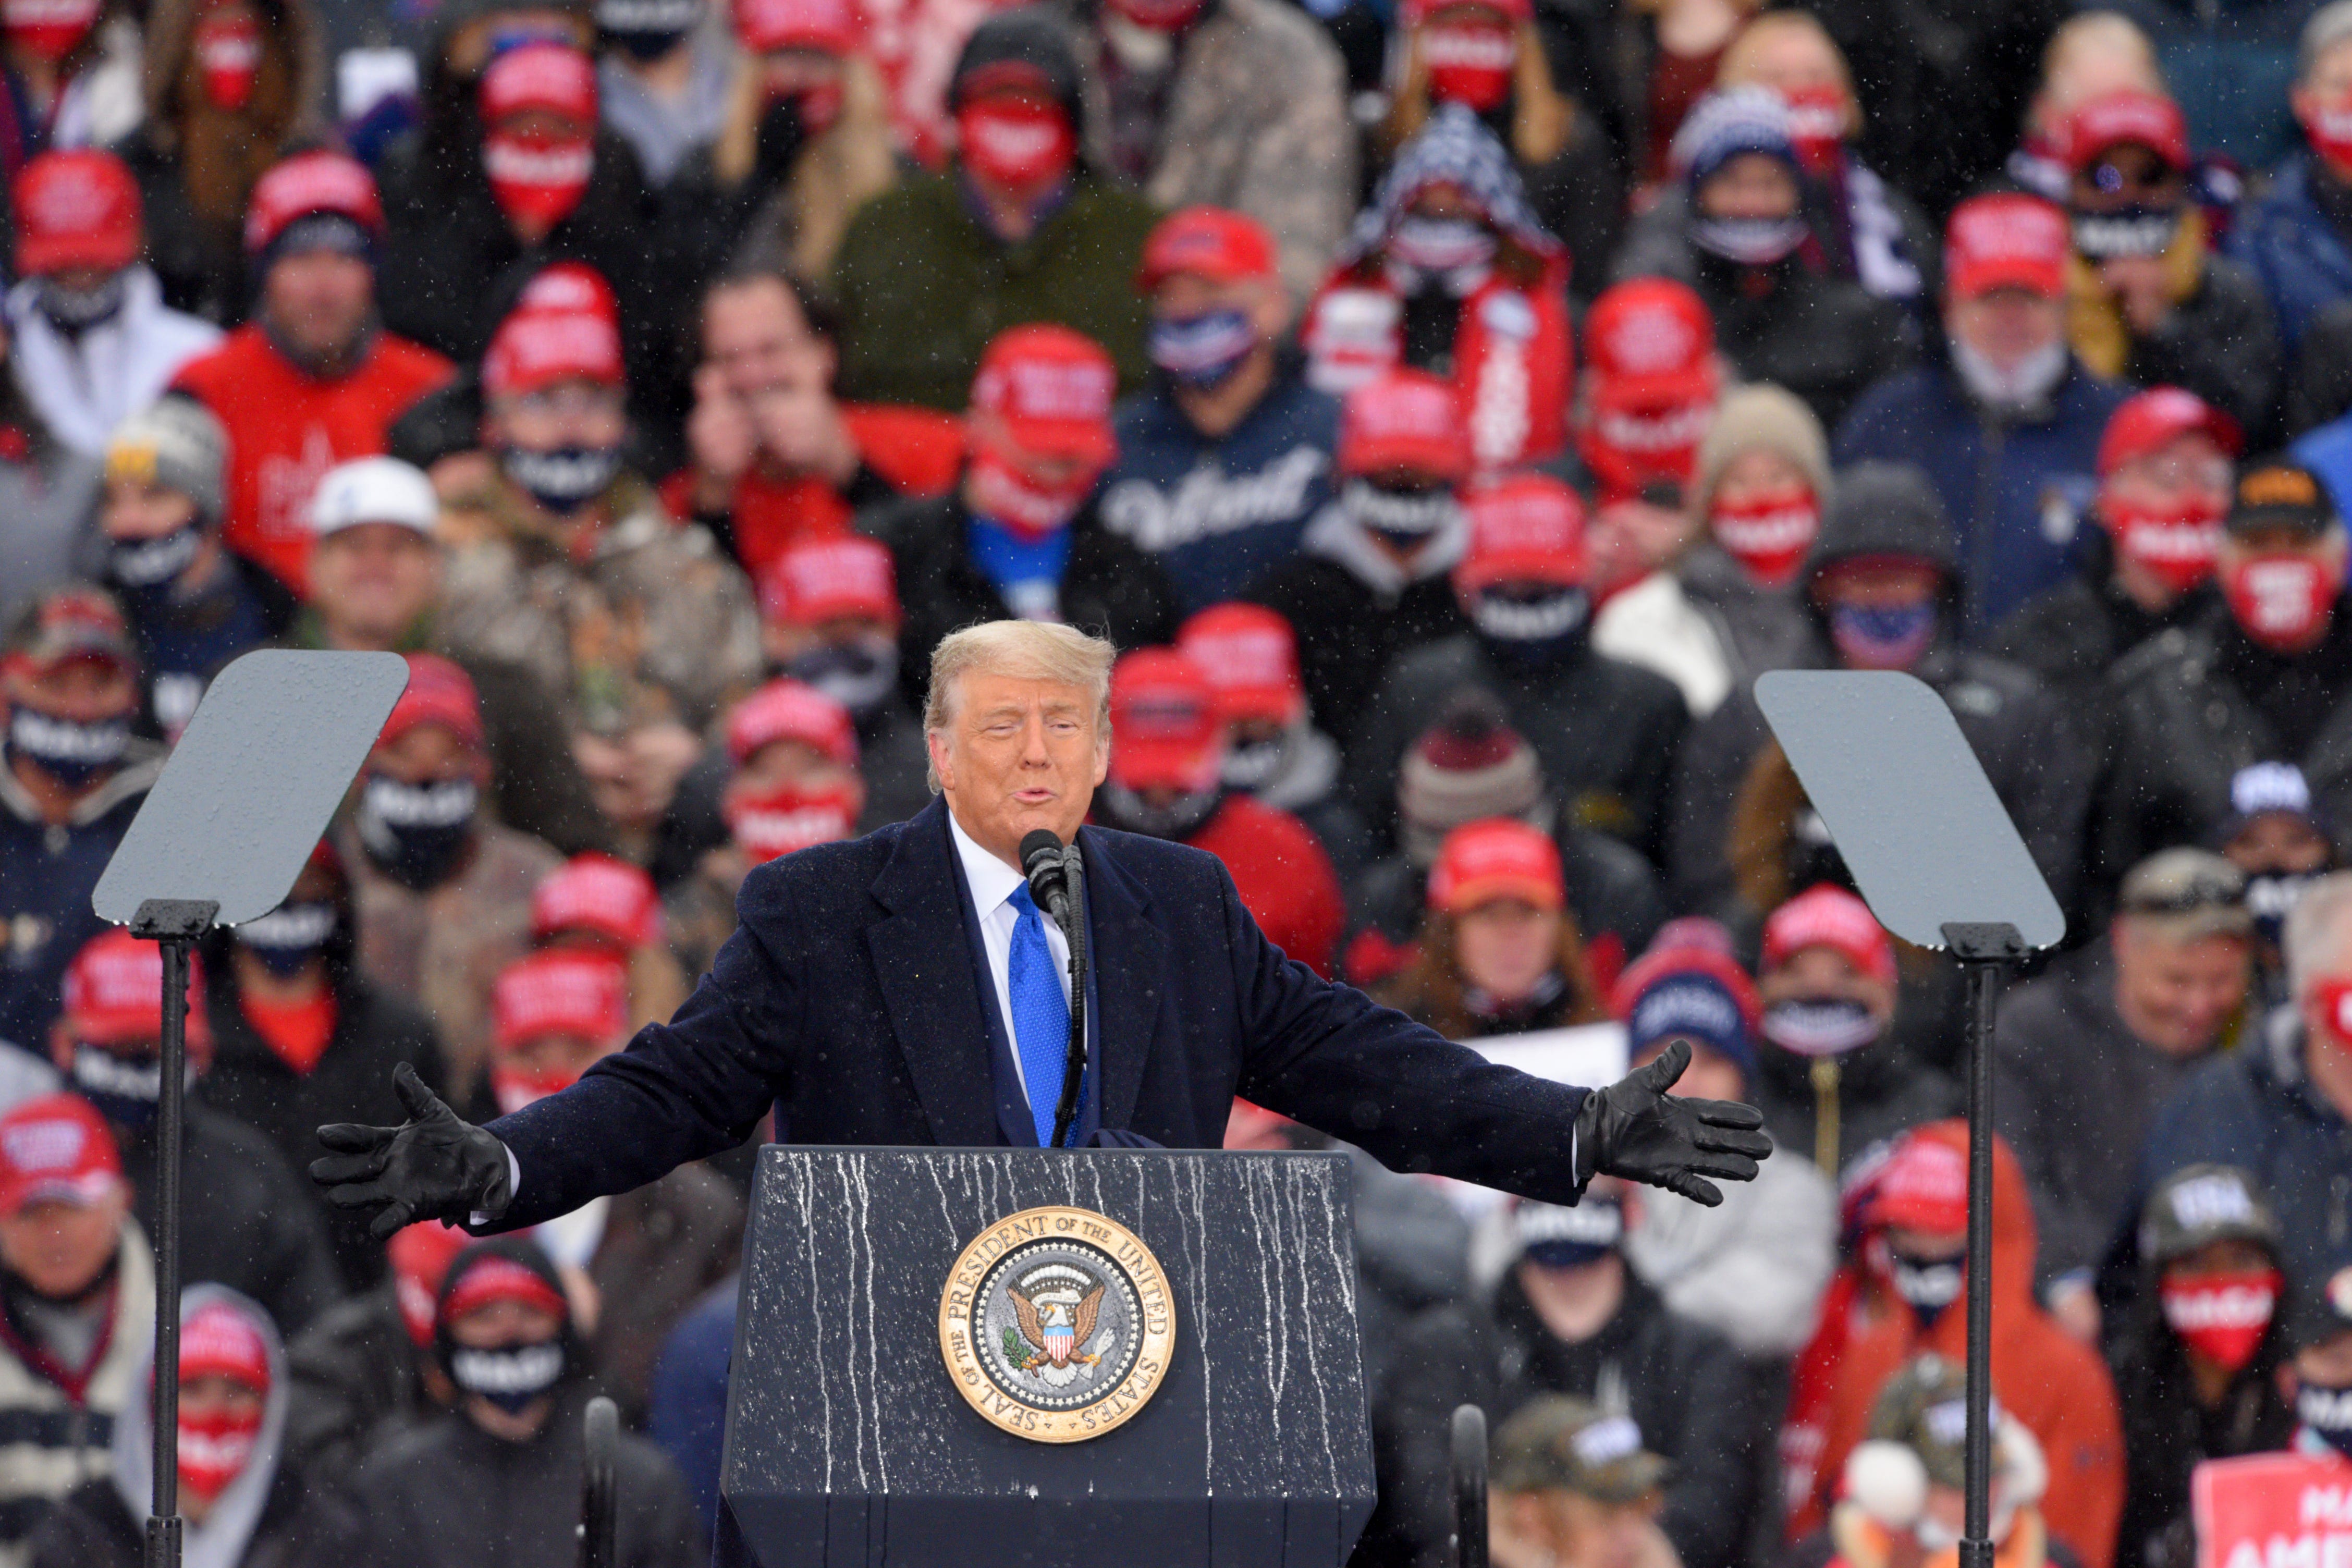 President Donald Trump addresses supporters during his Make America Great Again Victory Rally at AV Flight at the Capital Region International Airport in Lansing, Tuesday, October 27, 2020.